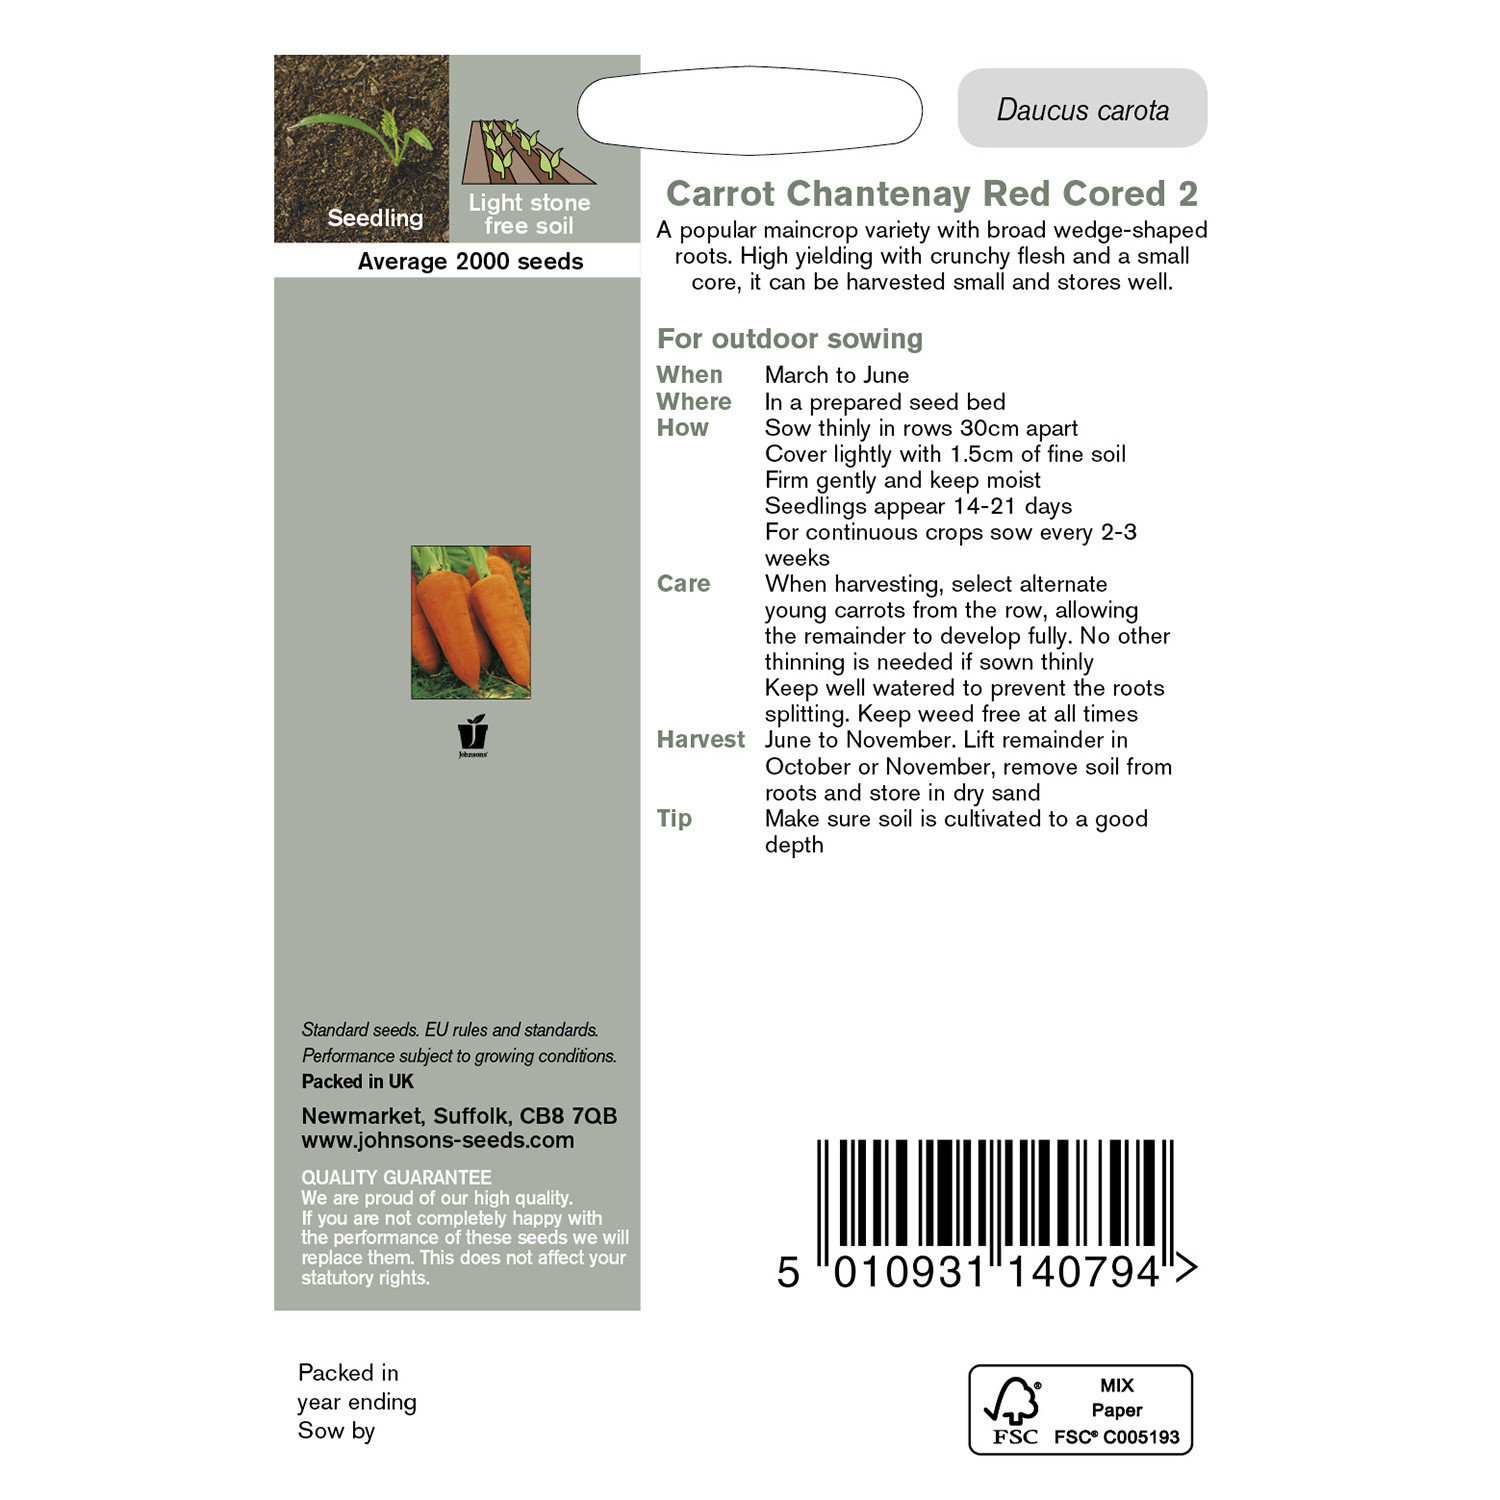 Johnsons Chantenay Red Cored Carrot Seeds Image 3